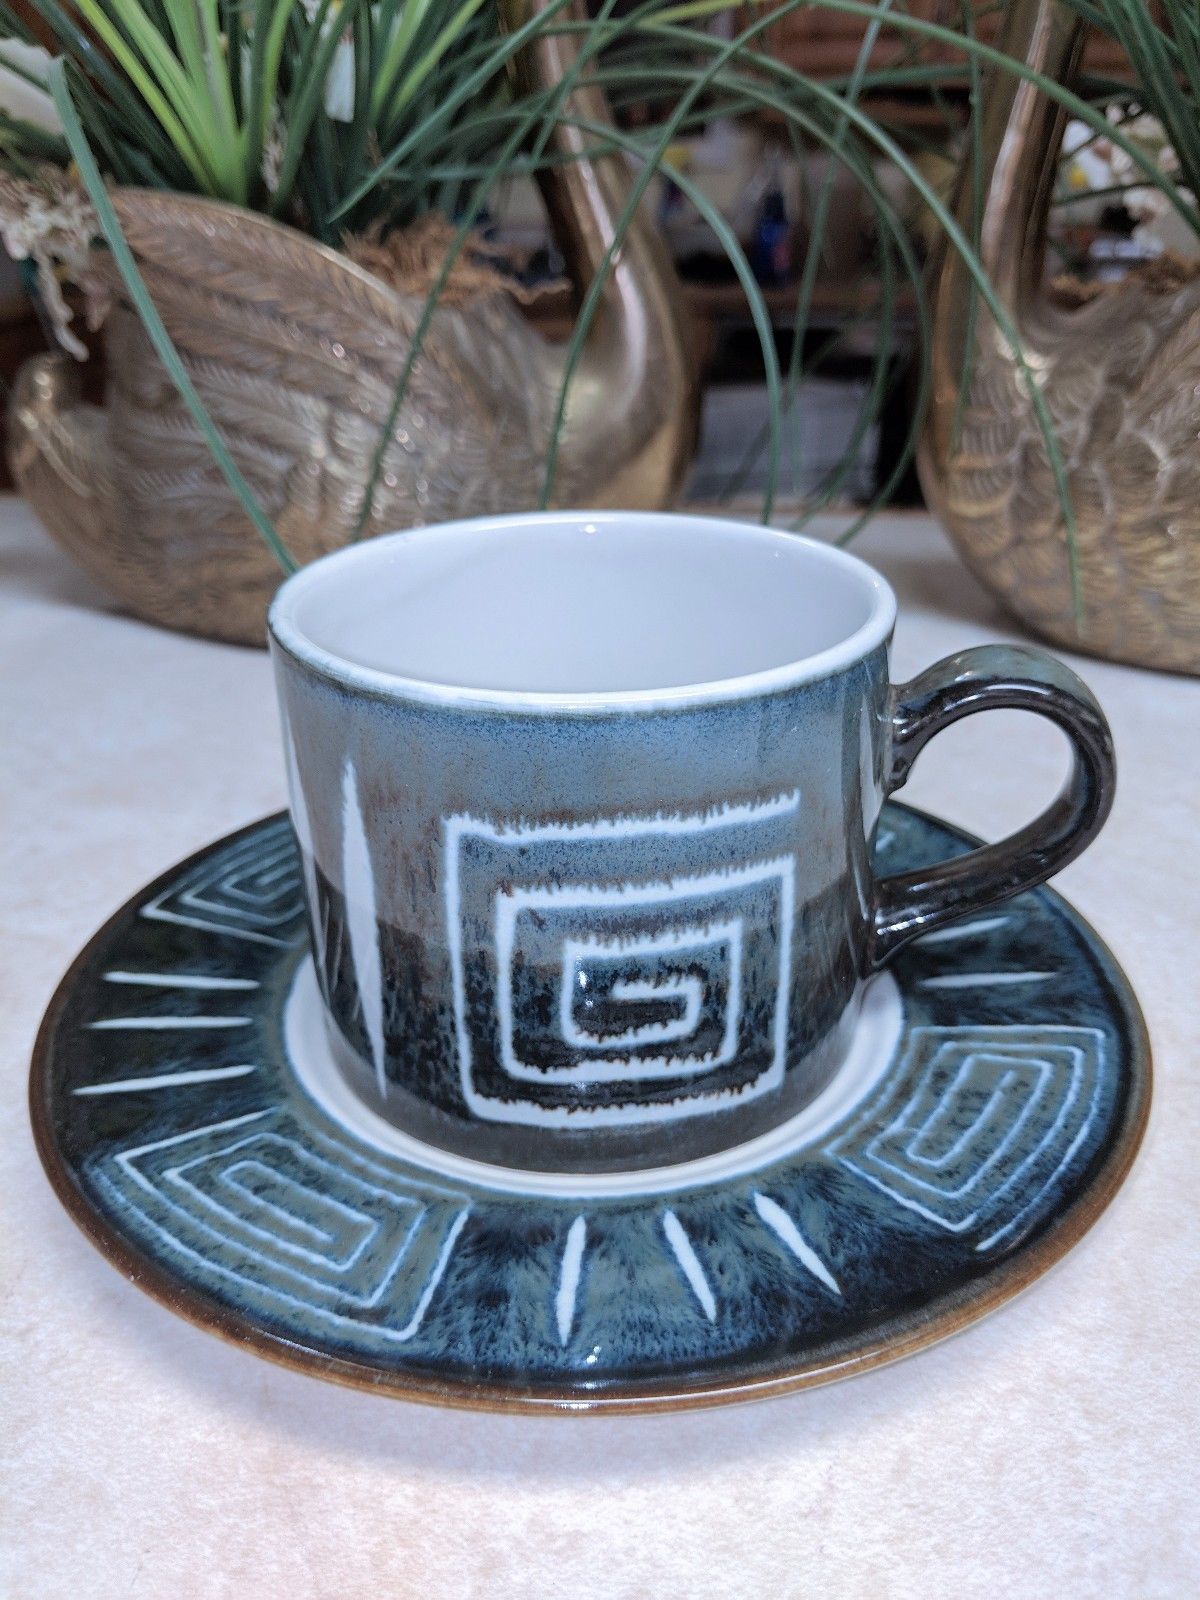 Primary image for MIKASA POTTERS CRAFT FIRESONG CUP AND SAUCER PATTERN HP300 Modern Southwestern